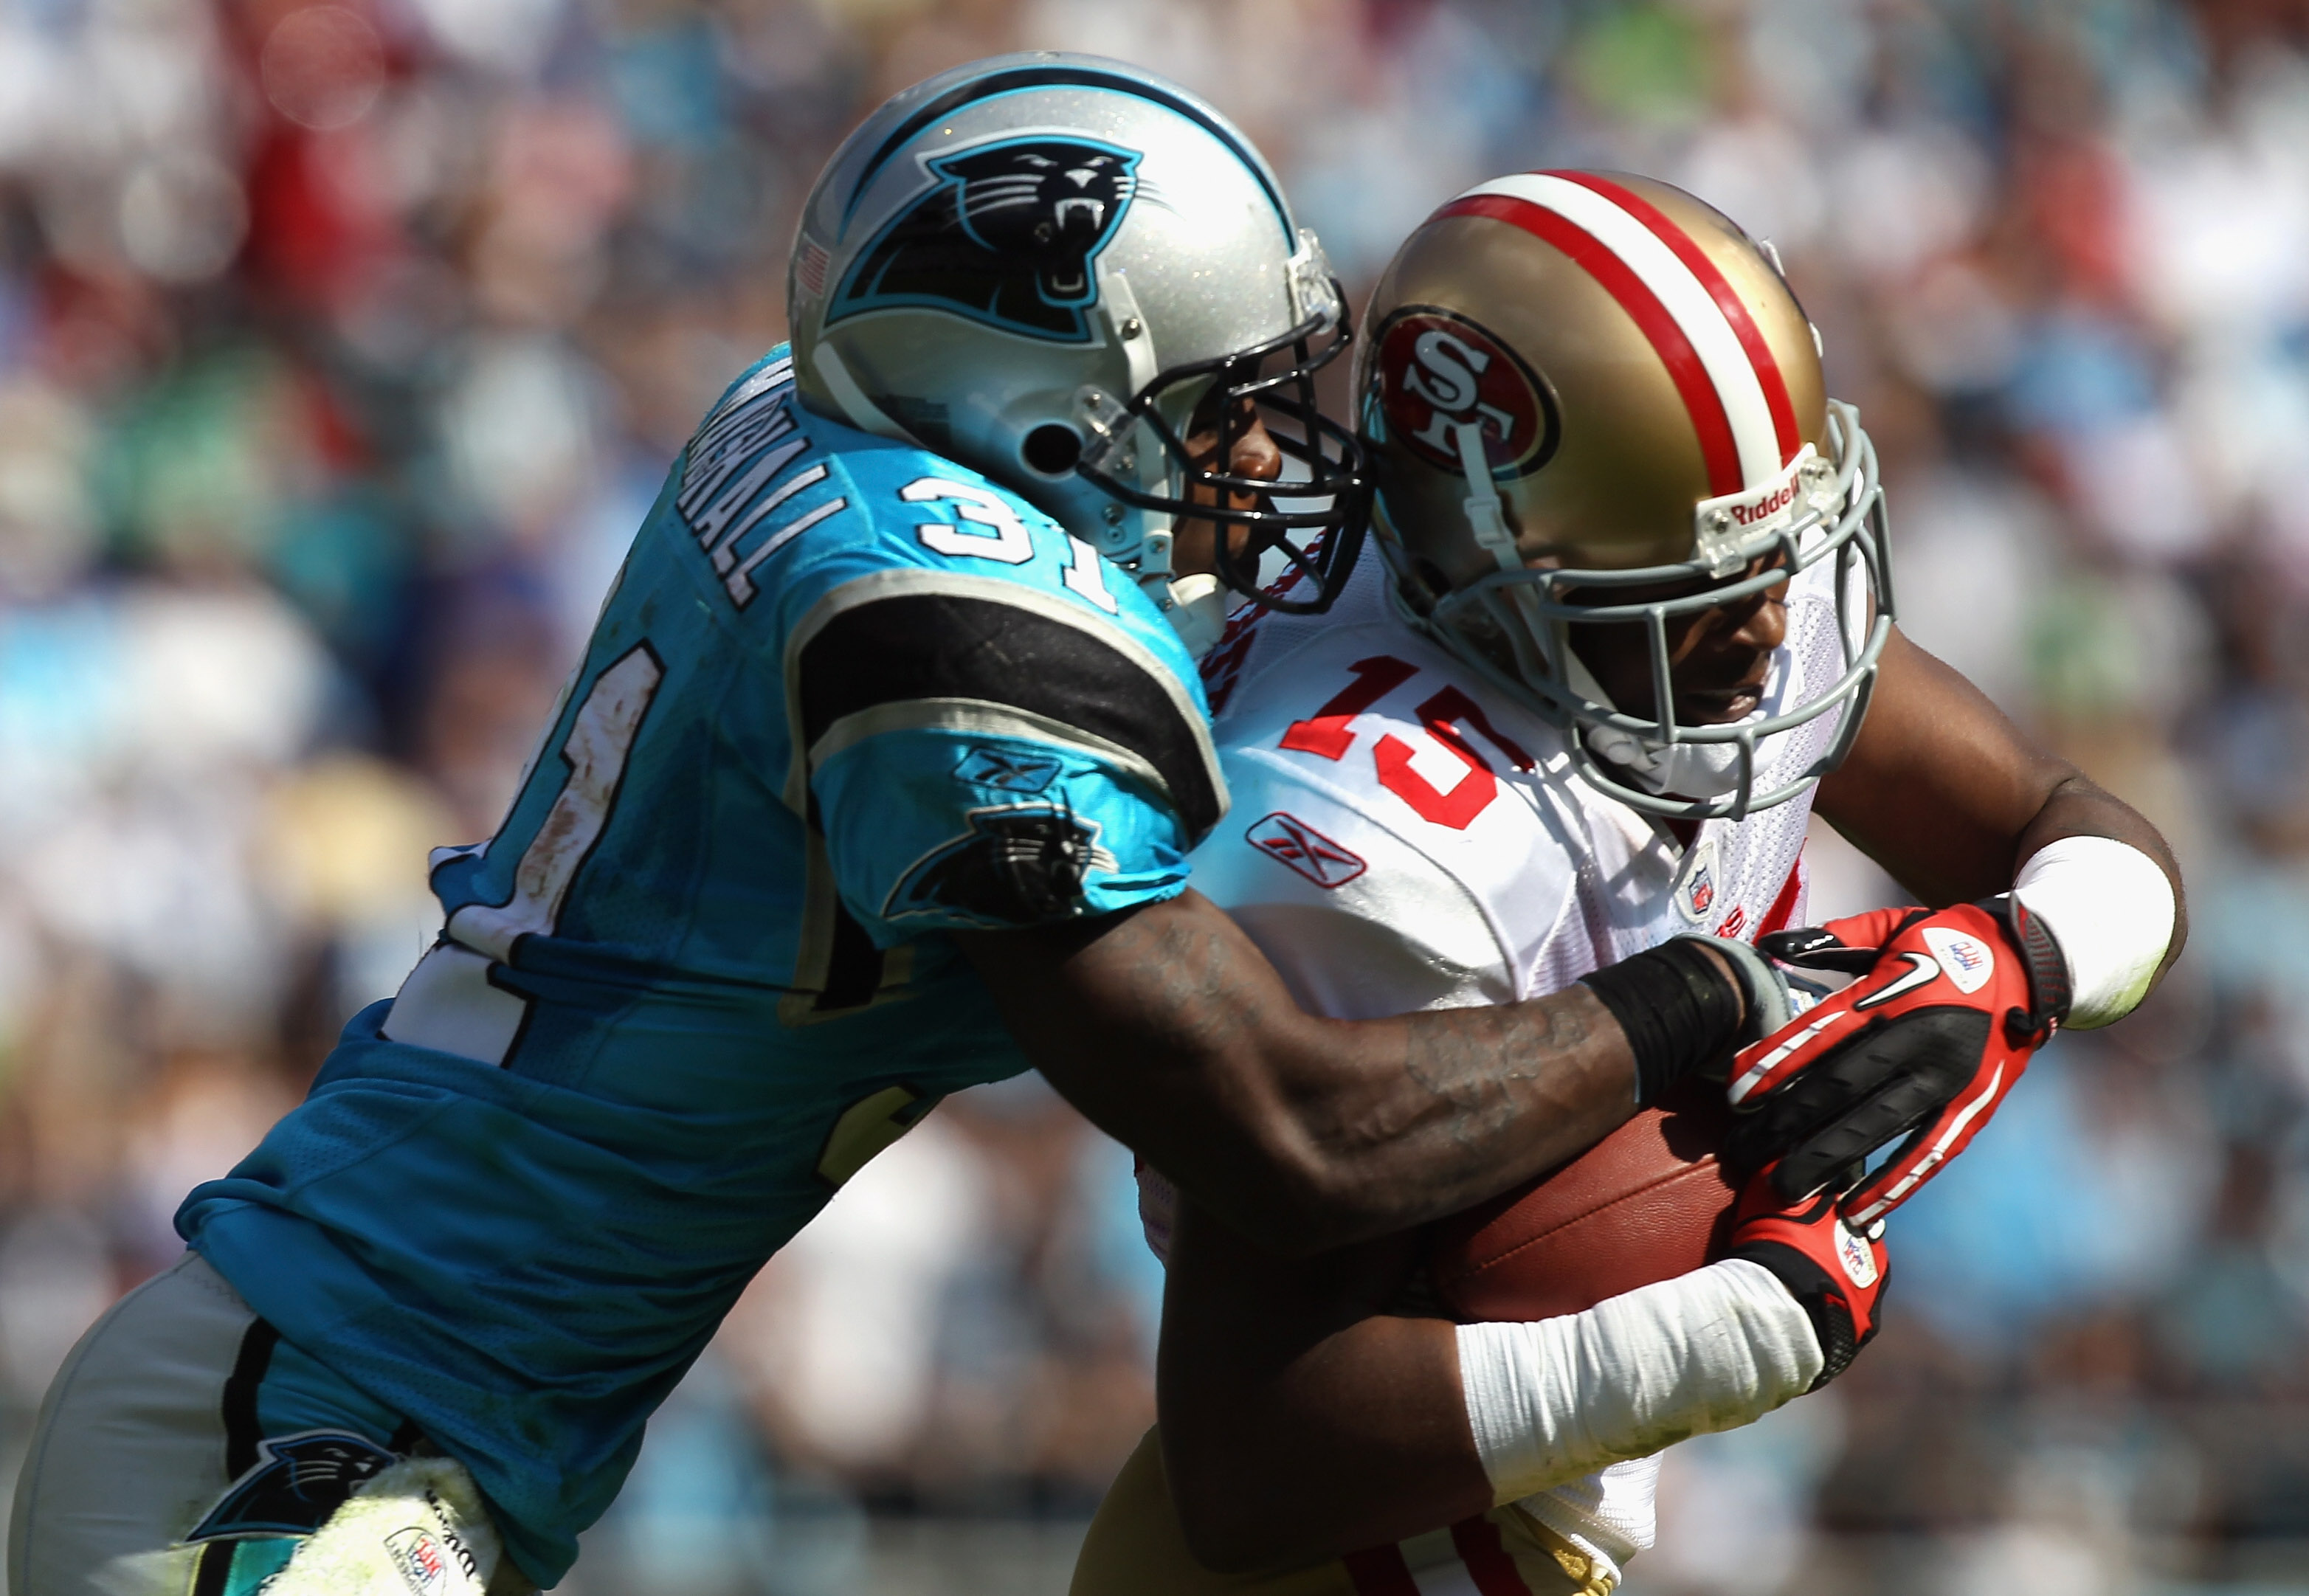 CHARLOTTE, NC - OCTOBER 24:  Michael Crabtree #15 of the San Francisco 49ers is tackled by Richard Marshall #31 of the Carolina Panthers during their game at Bank of America Stadium on October 24, 2010 in Charlotte, North Carolina.  (Photo by Streeter Lec